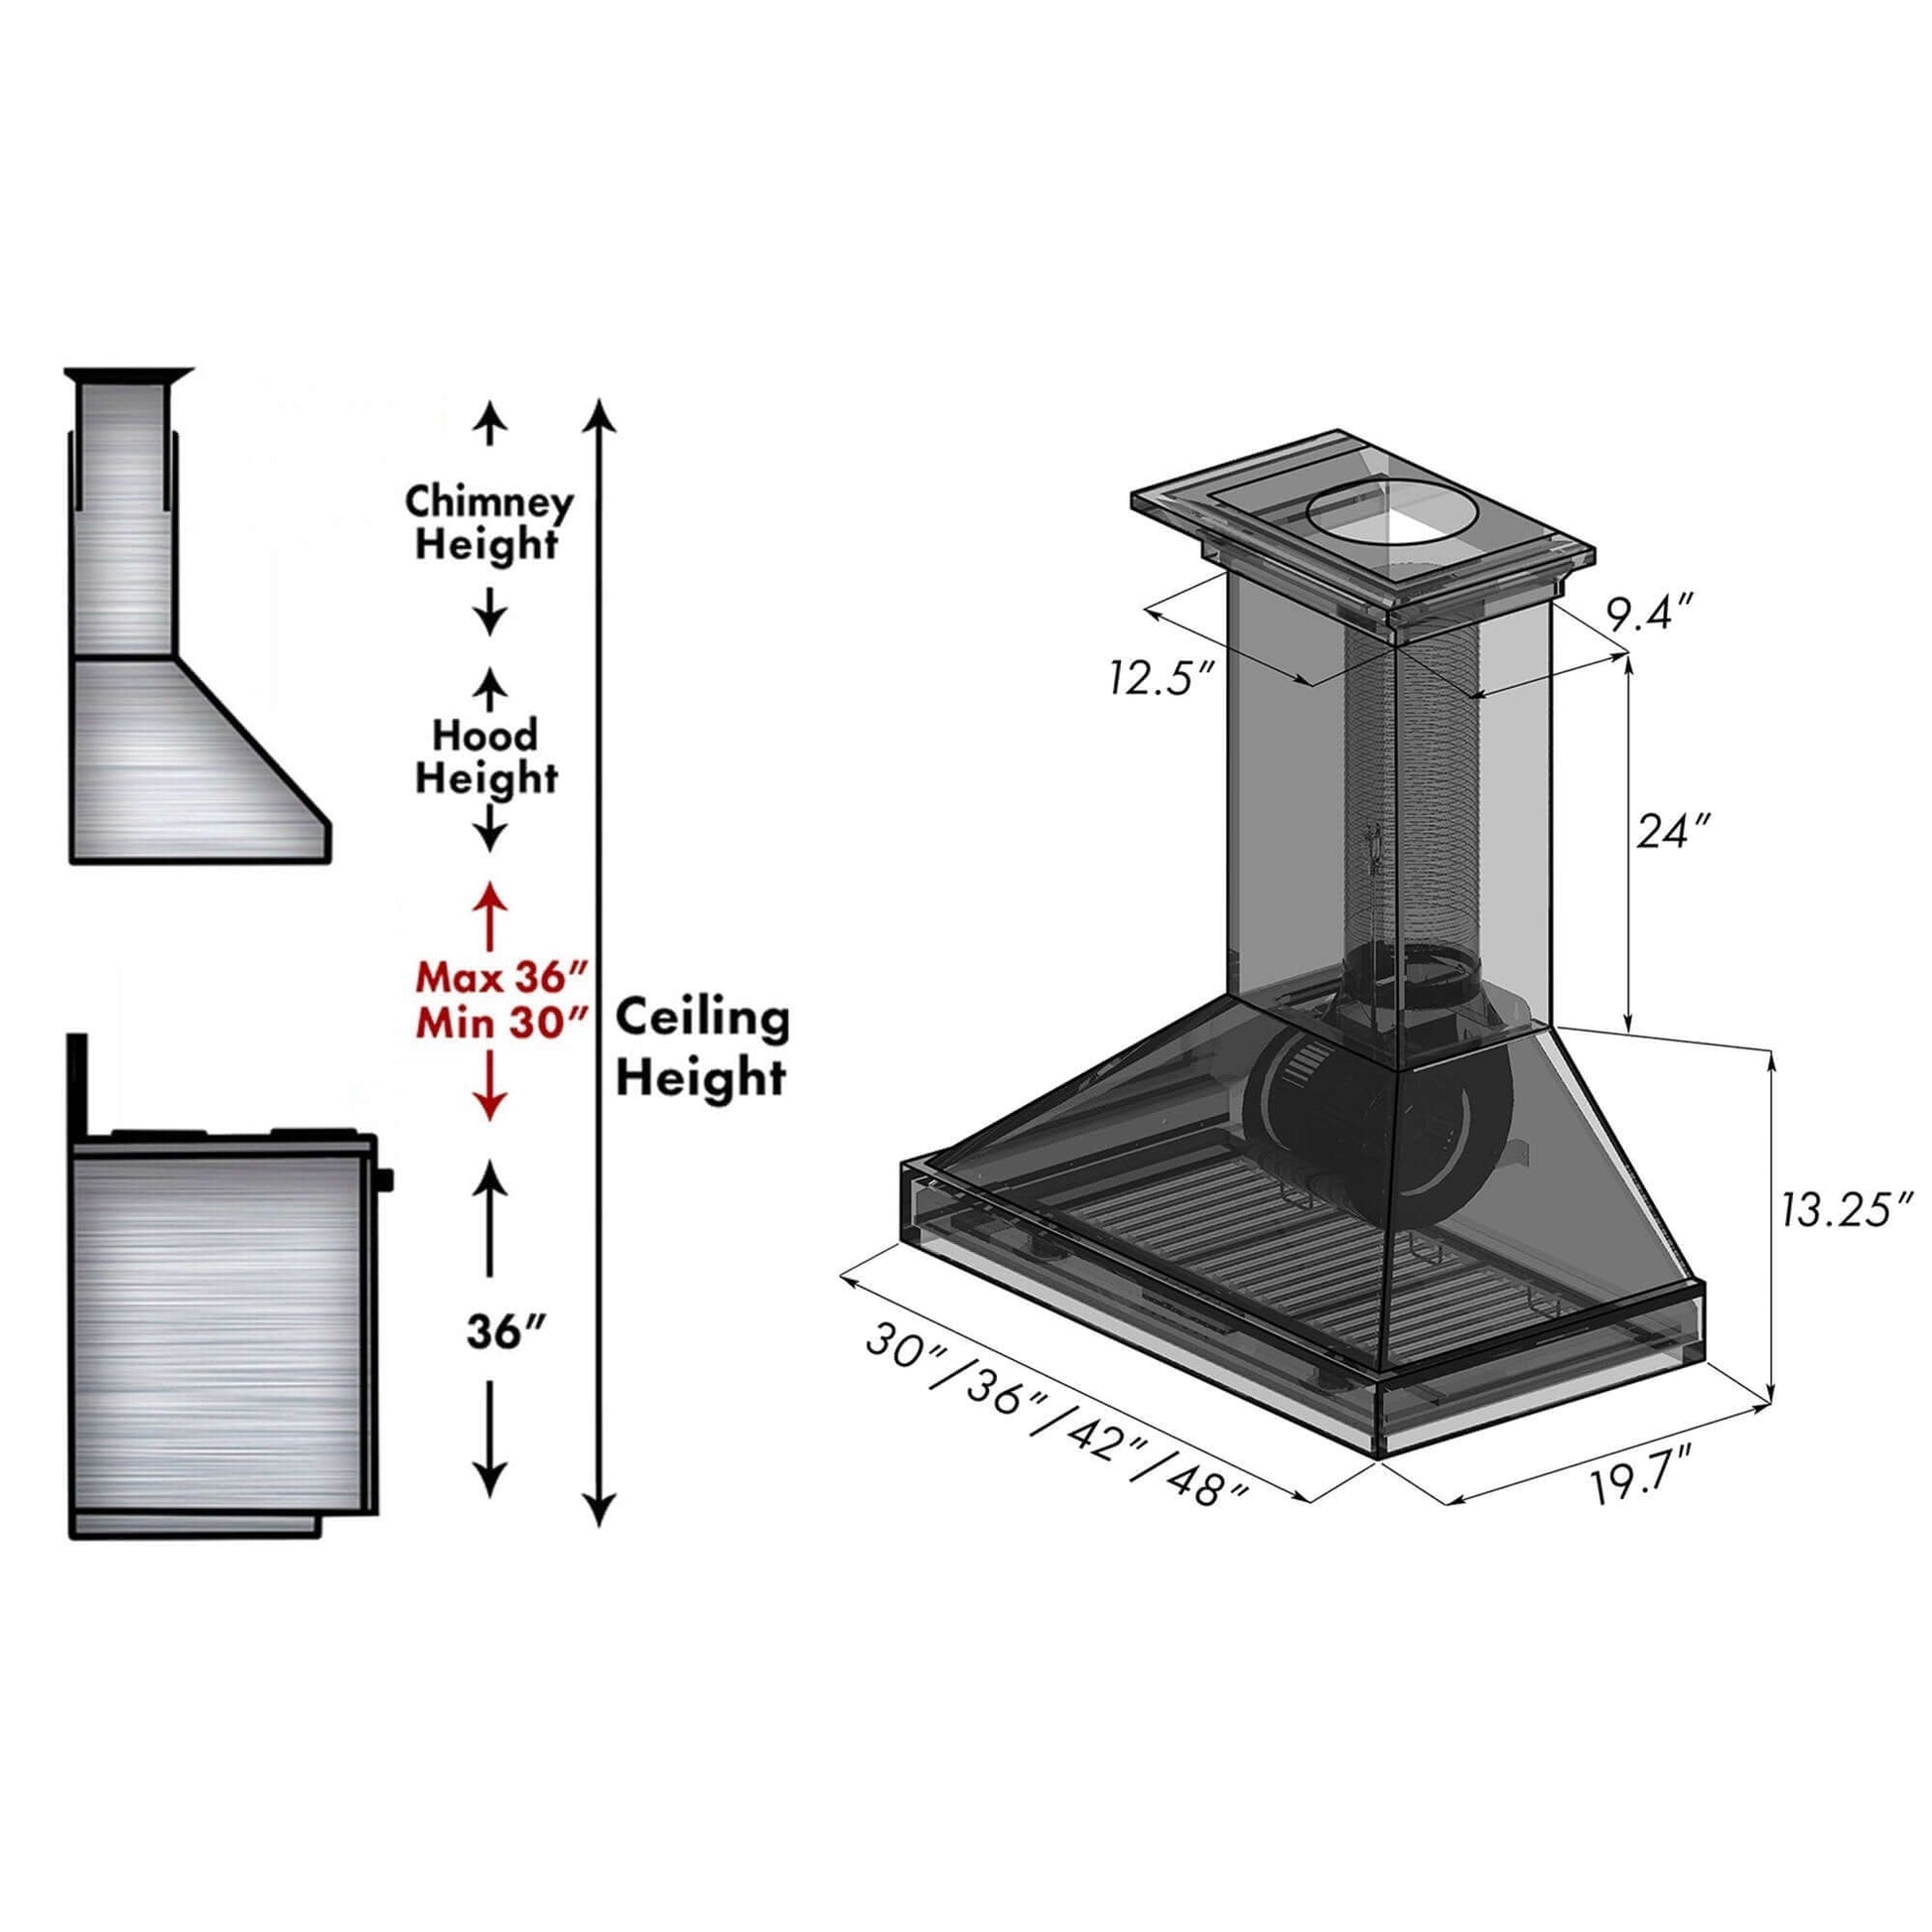 ZLINE Convertible Vent Wooden Wall Mount Range Hood in Black (KBCC) chimney height guide and dimensional diagram